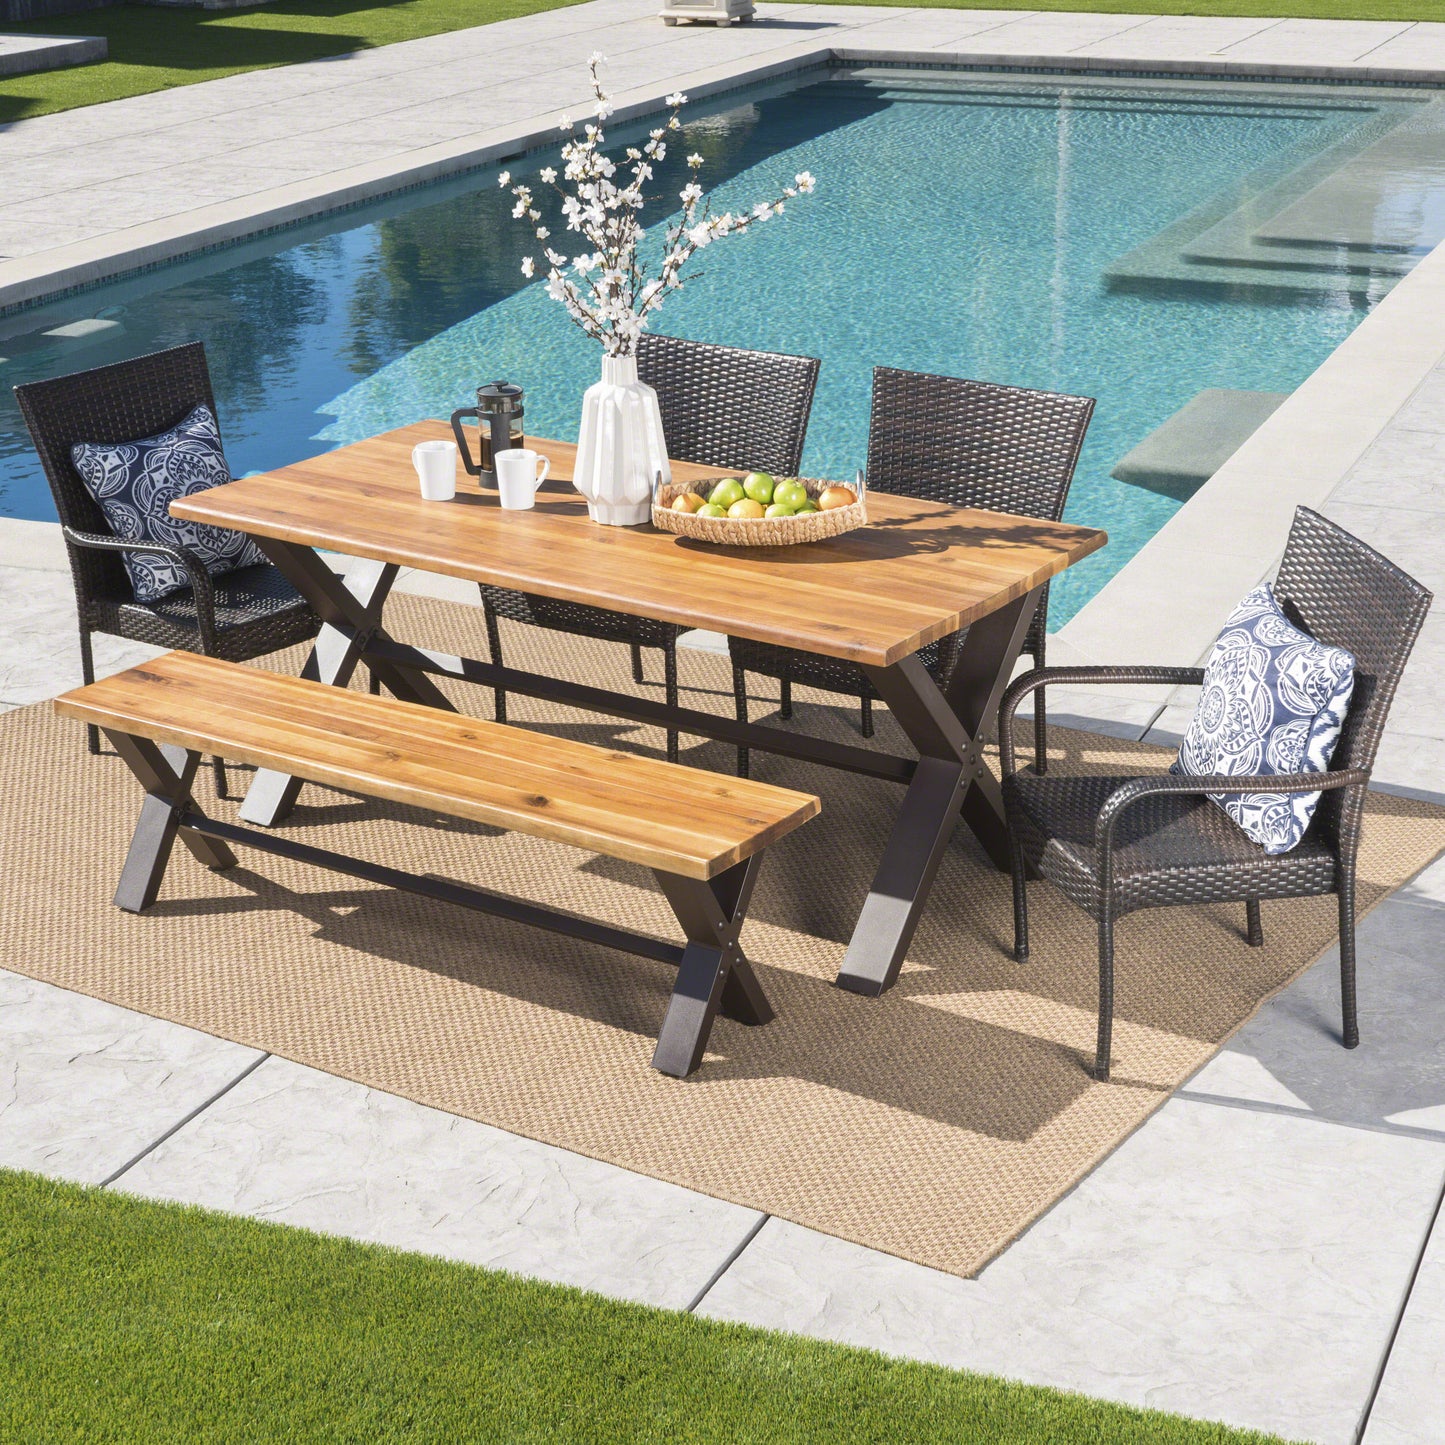 Bula Outdoor 6 Piece Acacia Wood Dining Set with Wicker Stacking Chairs